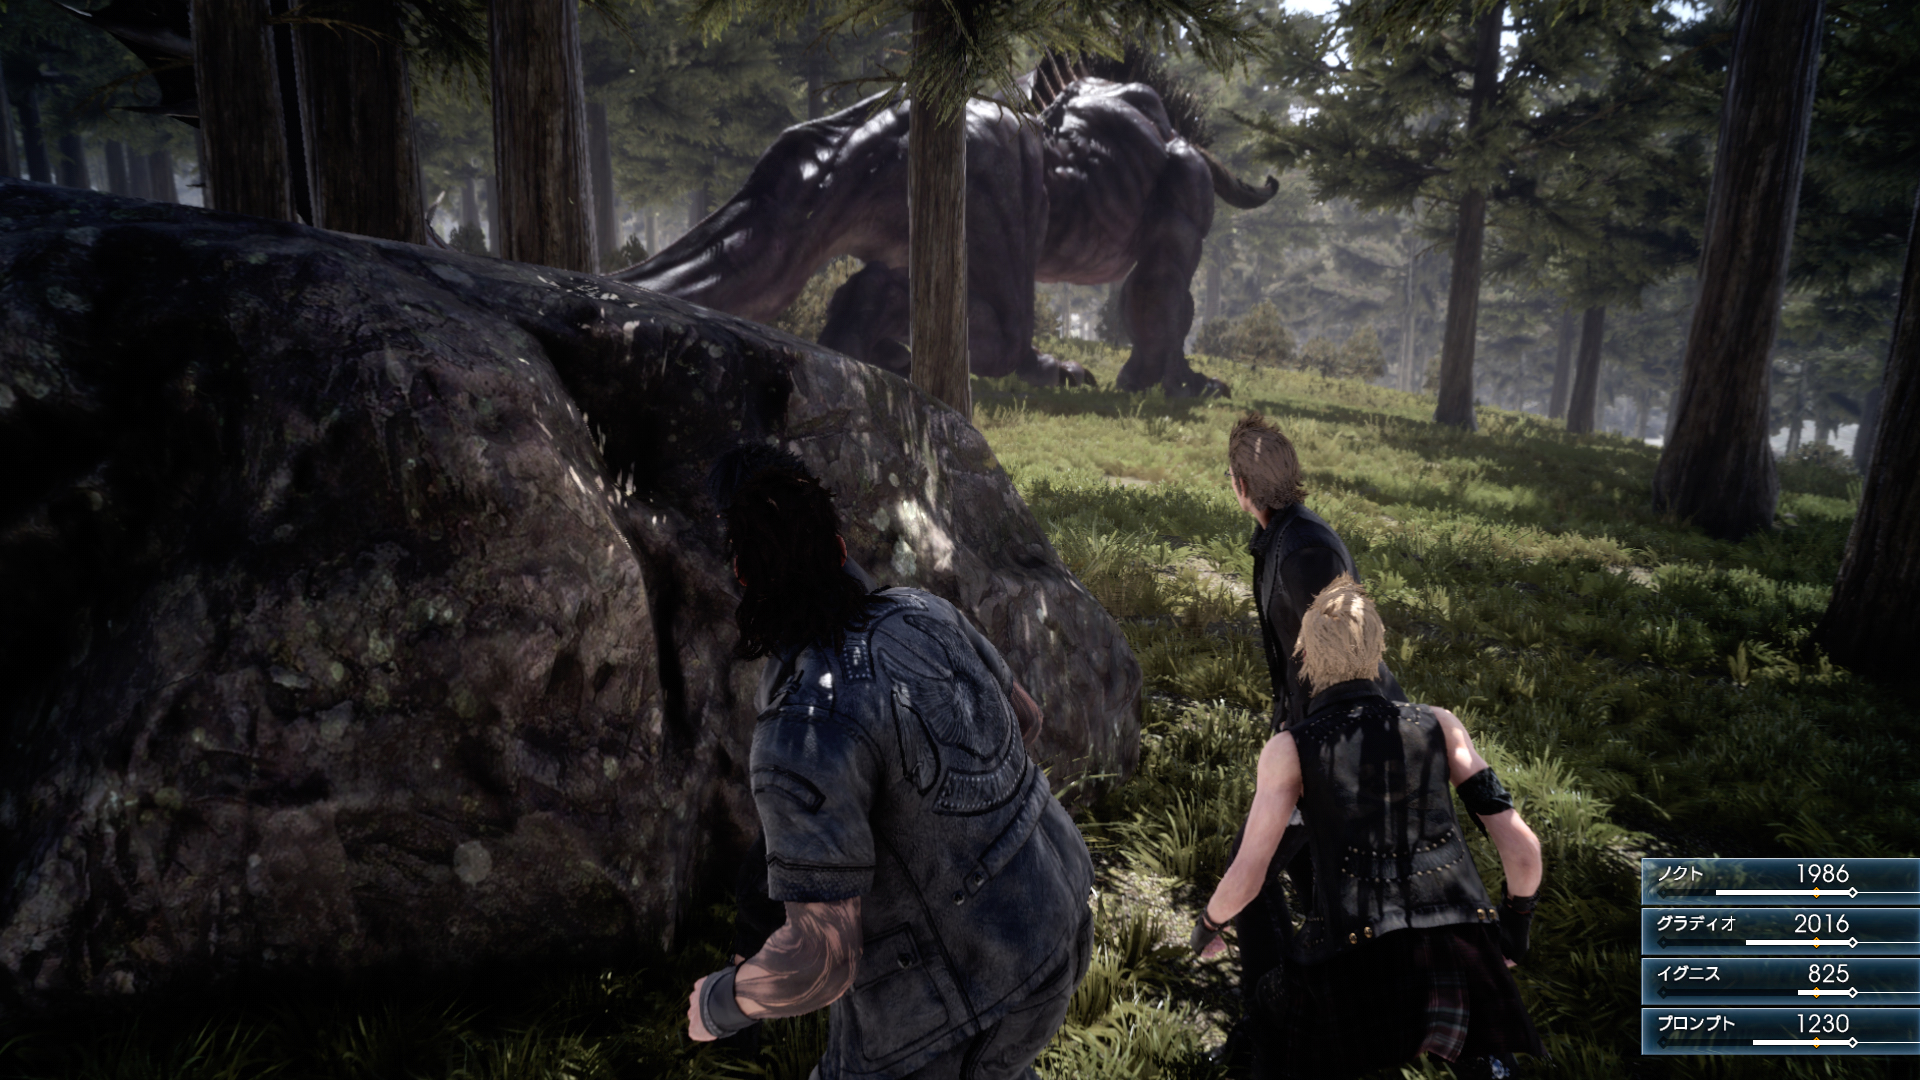 New Ffxv 1080p Screenshots Shows Truly Impressive Graphics Deadly Behemoth Monster Combat Sequences Gamepur